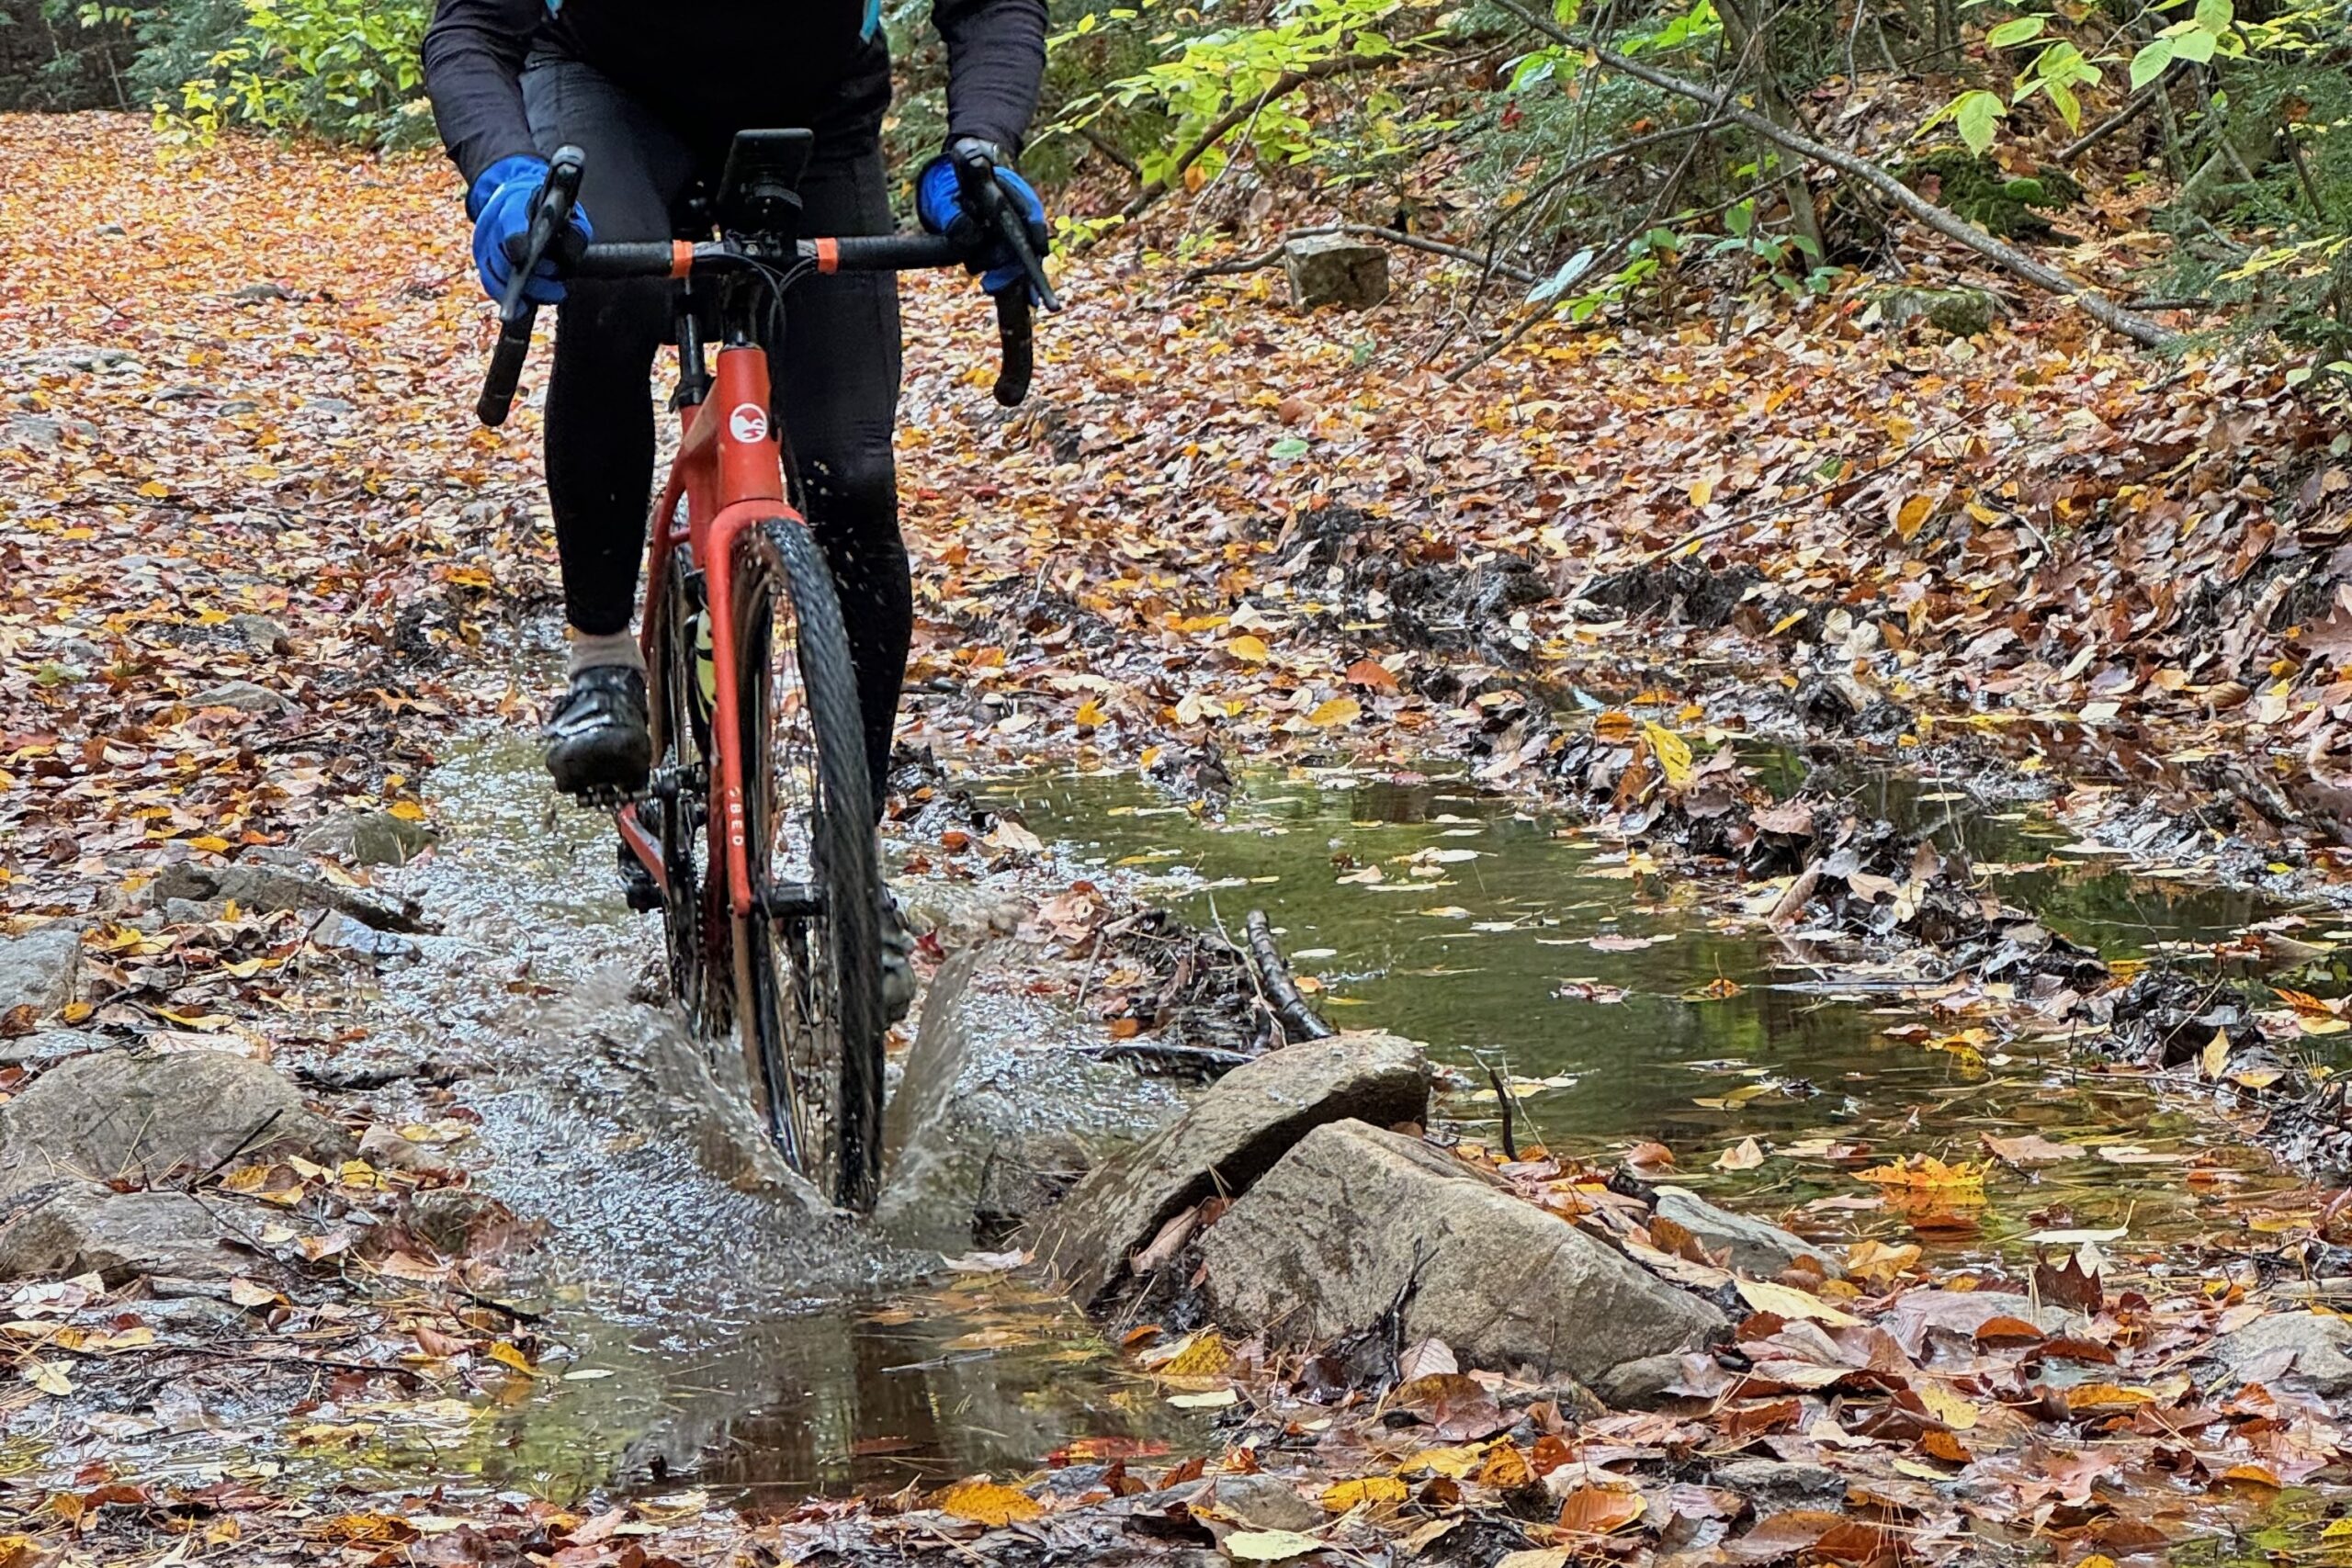 Riding through a puddle on a gravel bike in conditions that are best suited to a wet chain lube